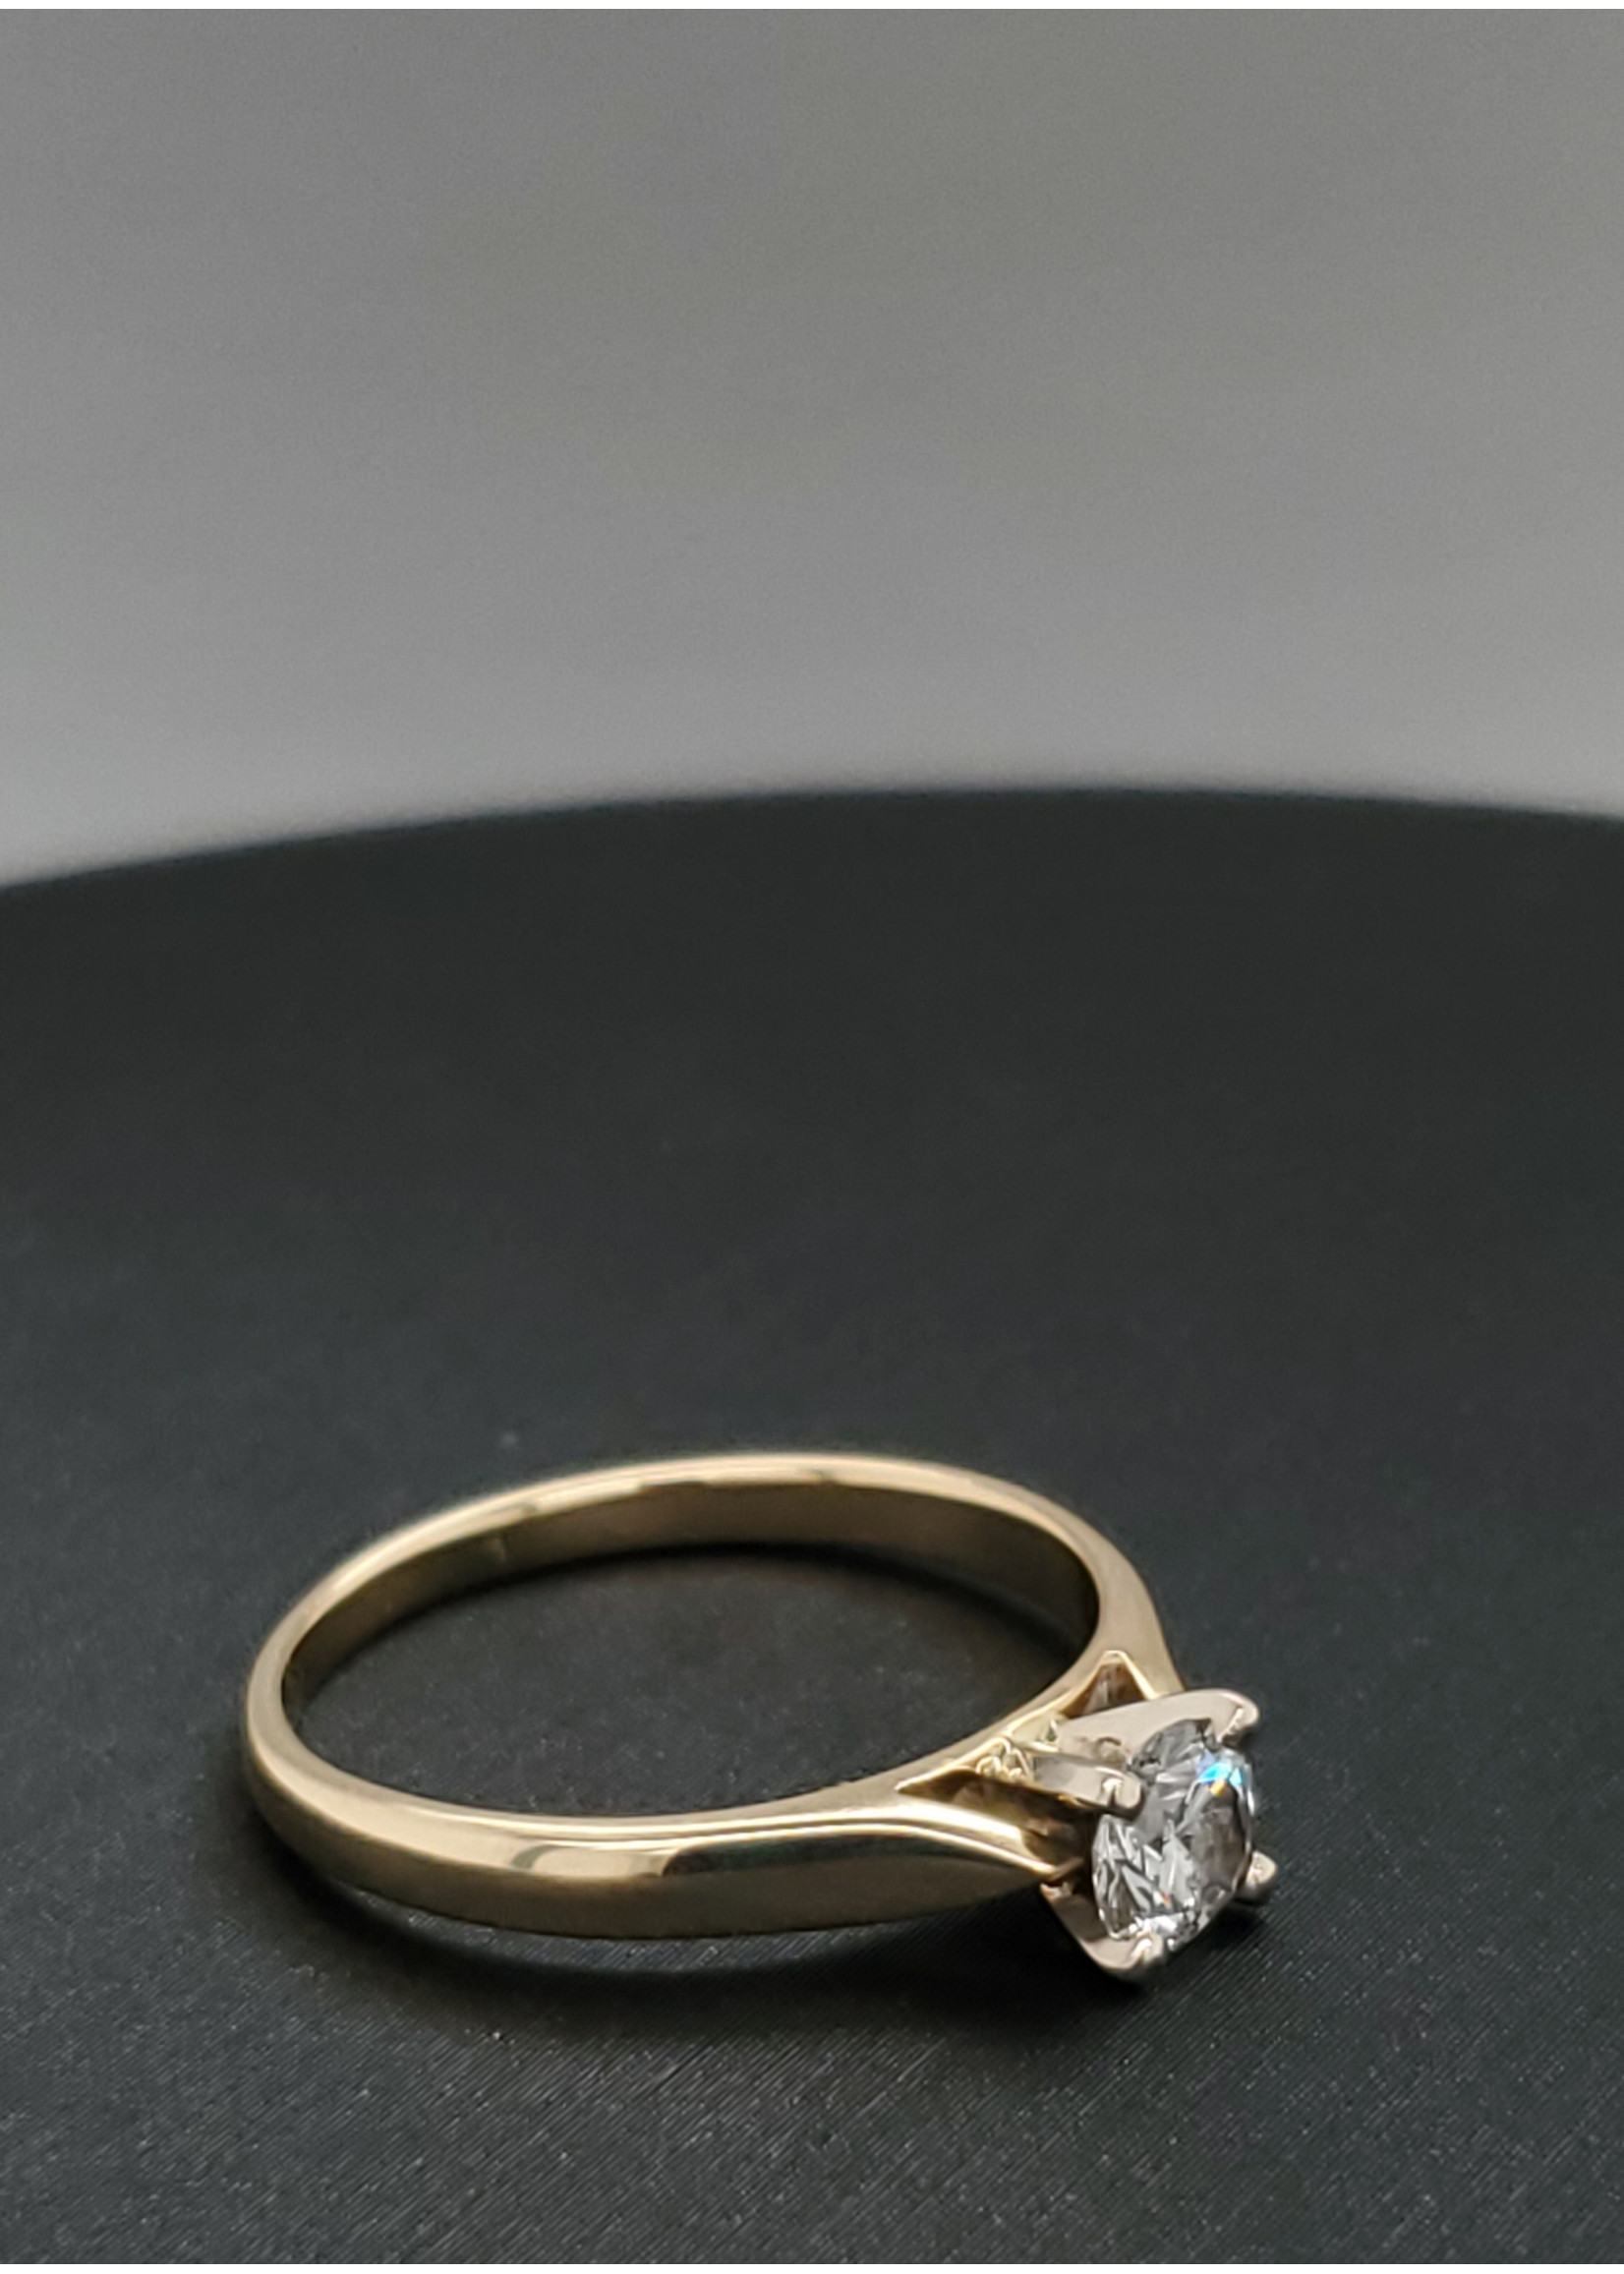 Vintage Jewellery Vintage 14k Solitaire Ring | Sz 6.25 1.8mm band